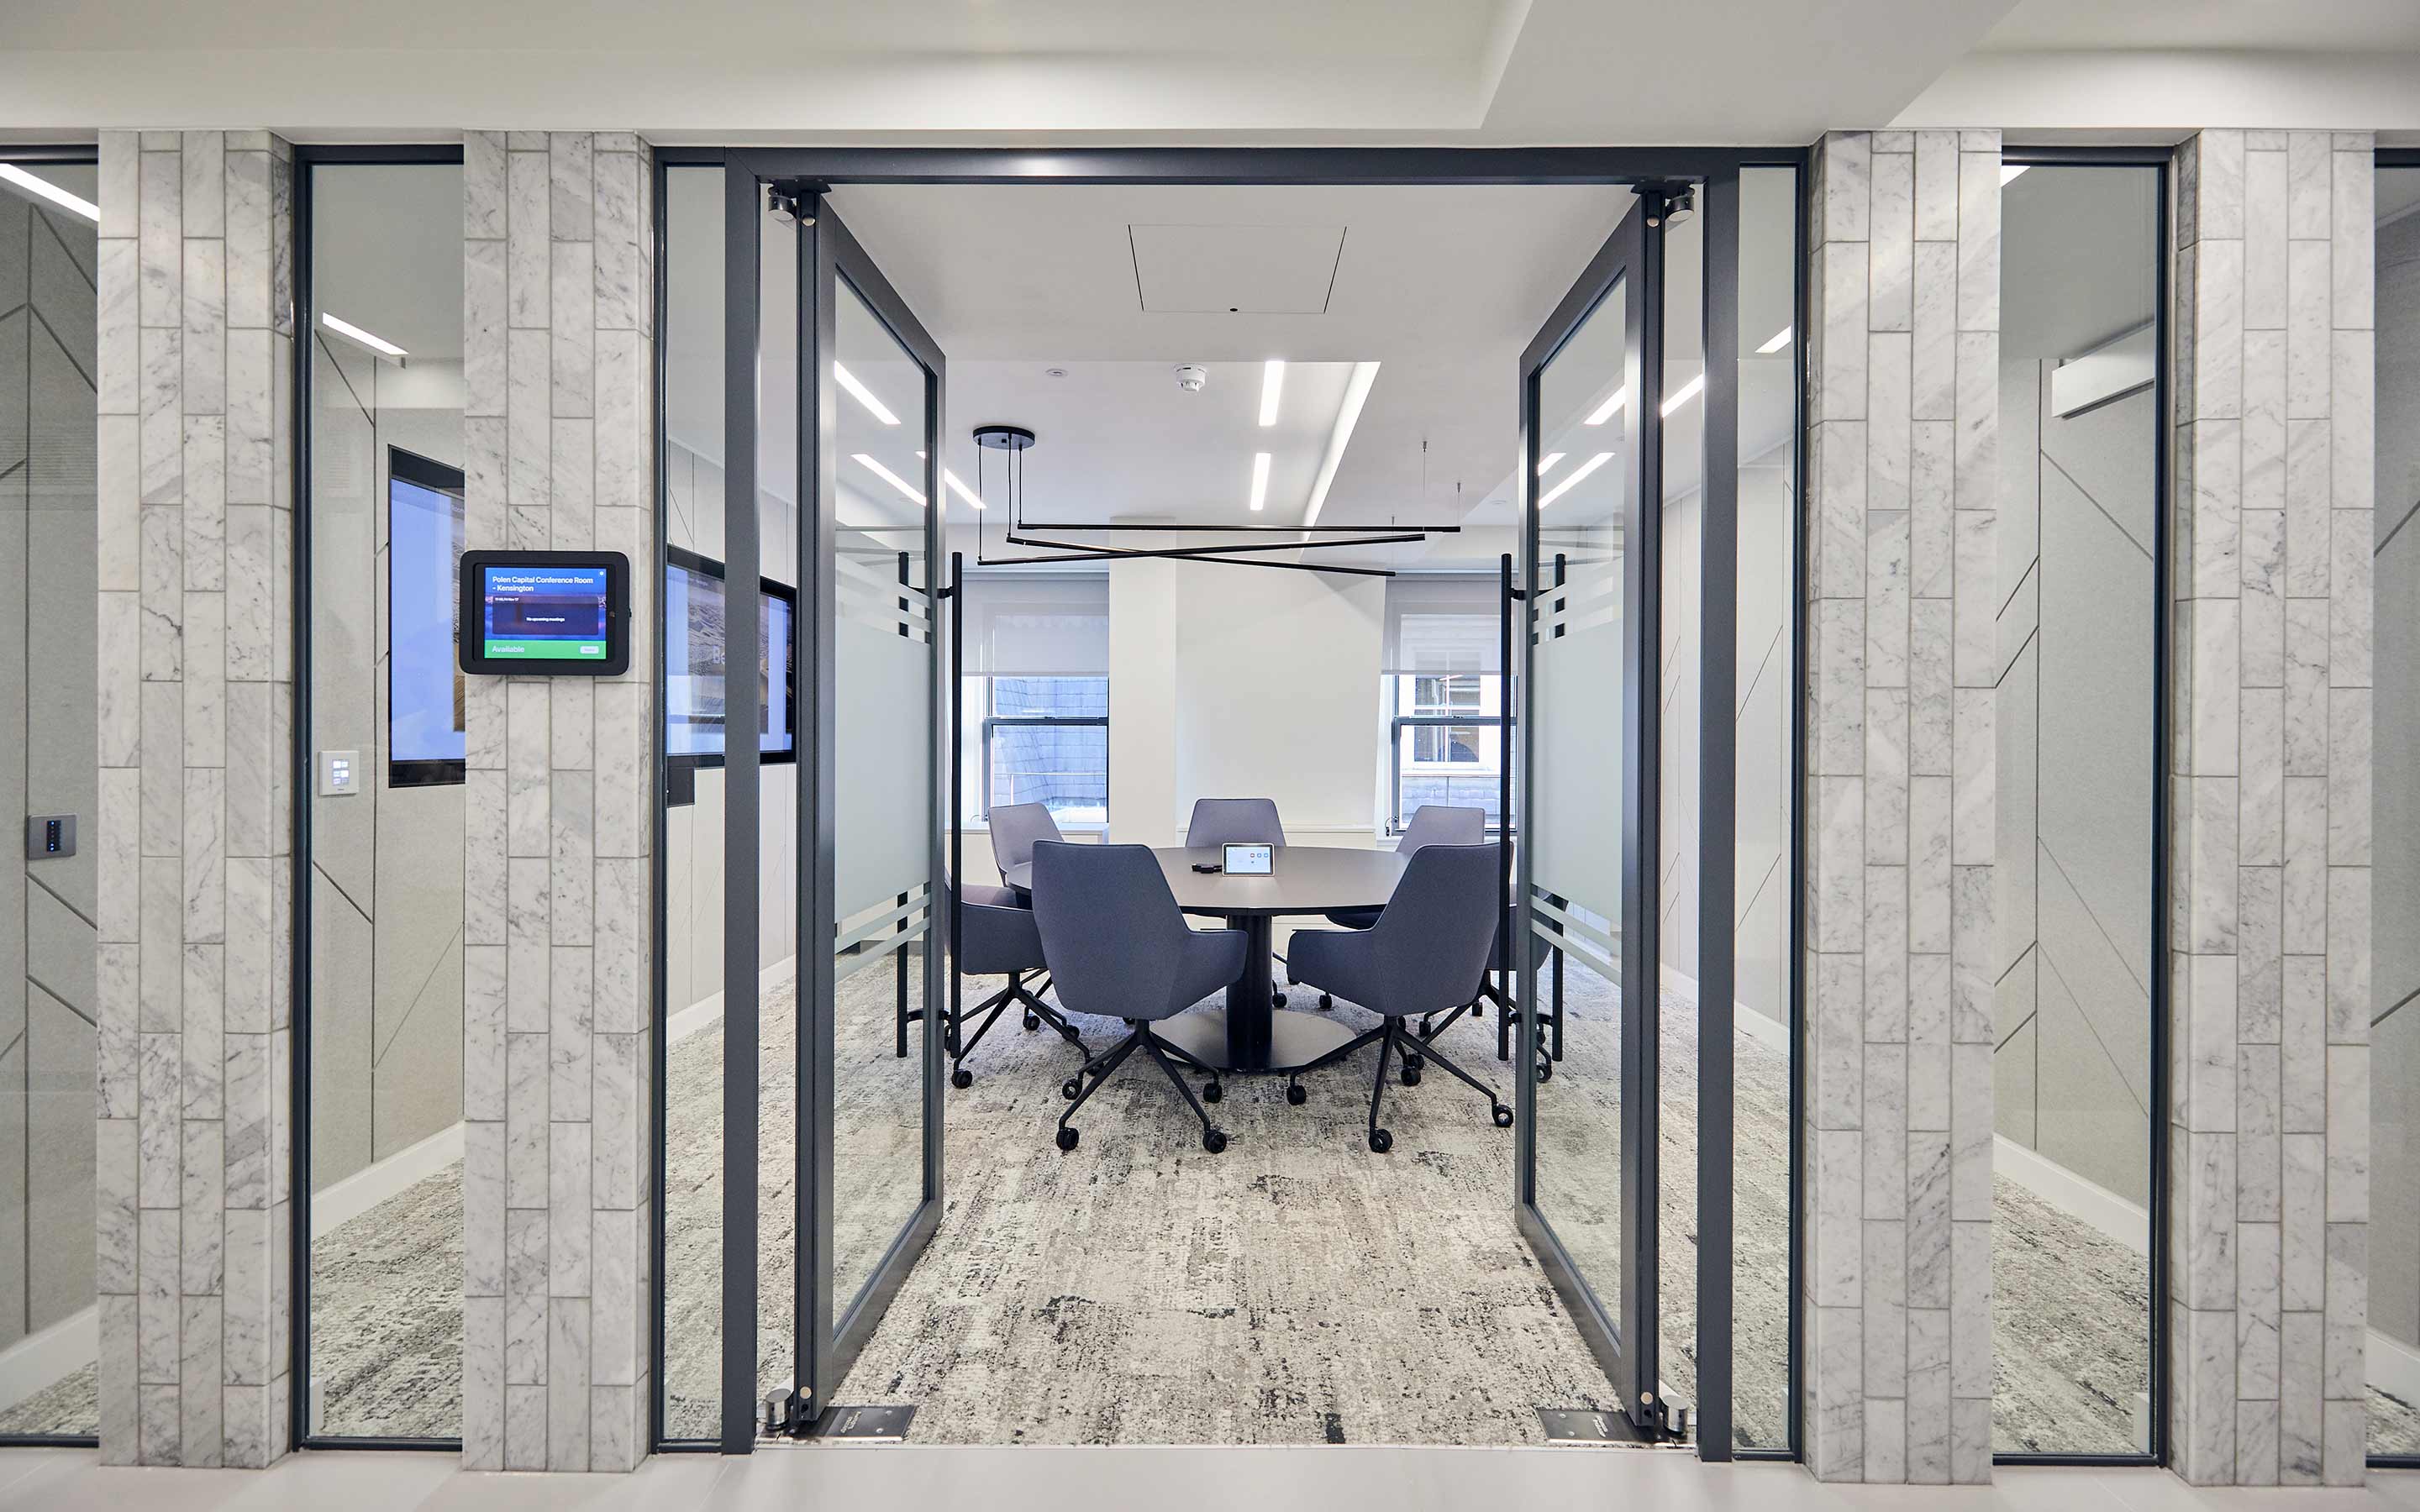 A well-lit conference room adorned with glass walls, blue chairs, and a stylish round table, reflecting a thoughtfully designed workplace for productive meetings